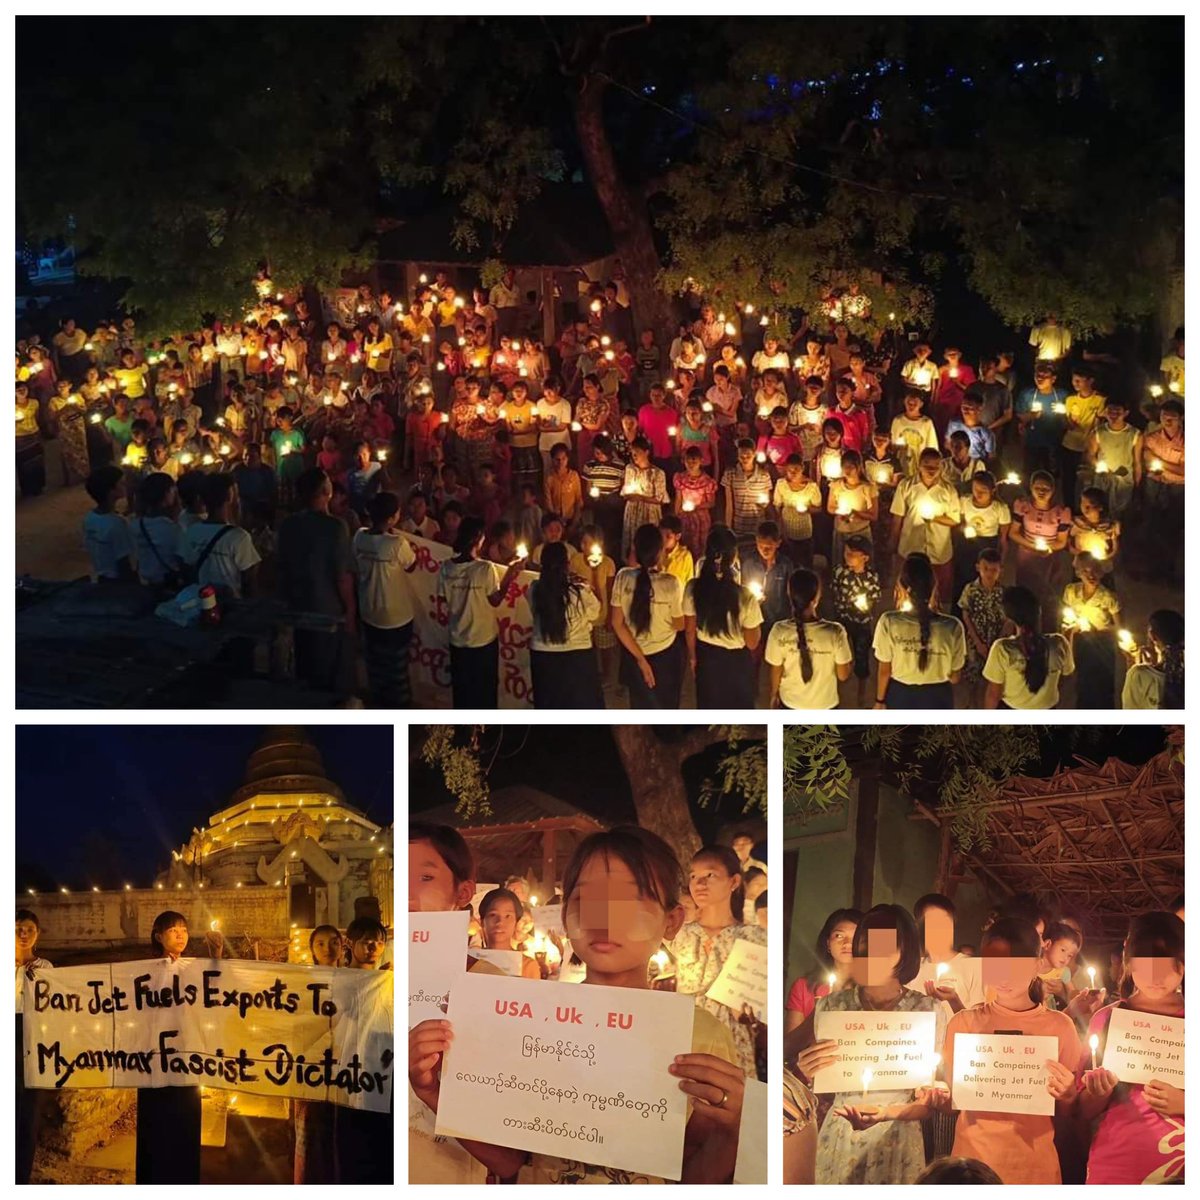 In a village in the southern part of Salngyi Tsp, a night strike against the terrorist military dictatorship and a campaign to ban the jet fuel export to junta army were held by locals.
@UN @ASEAN @EUCouncil
@POTUS
#BanJetFuelExportsToMM
#2024Apr29Coup
#WhatsHappeningInMyanmar